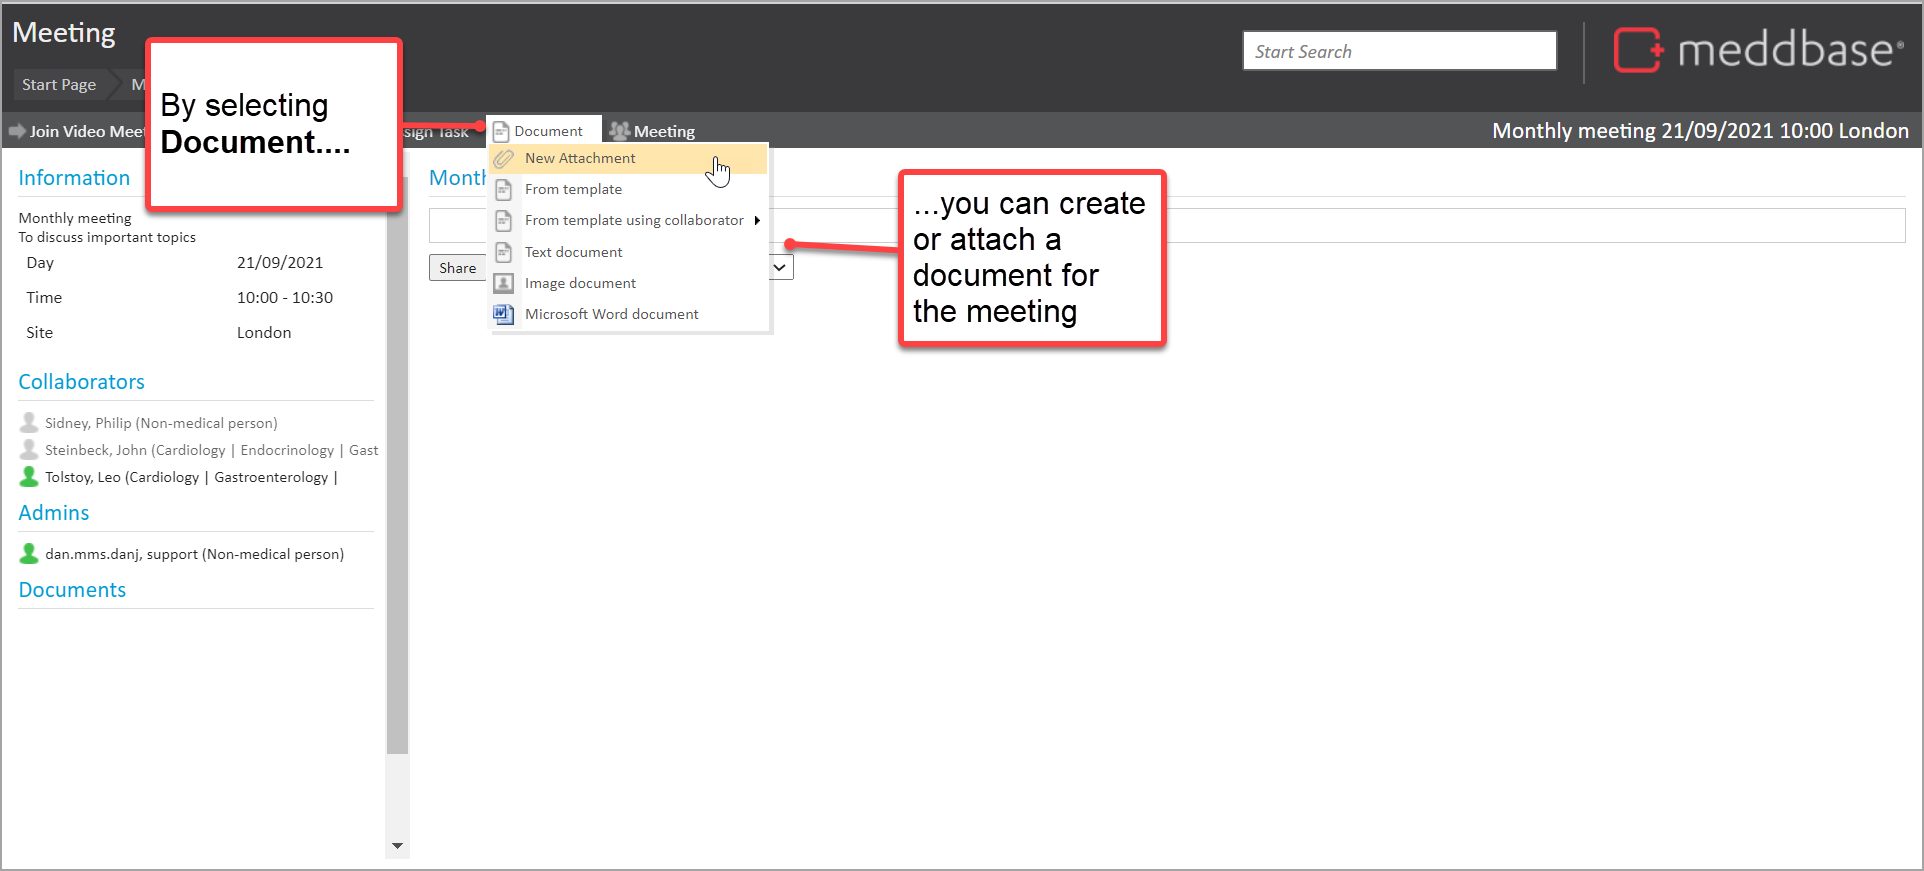 Viewing meeting and selecting document to display a menu of document related options